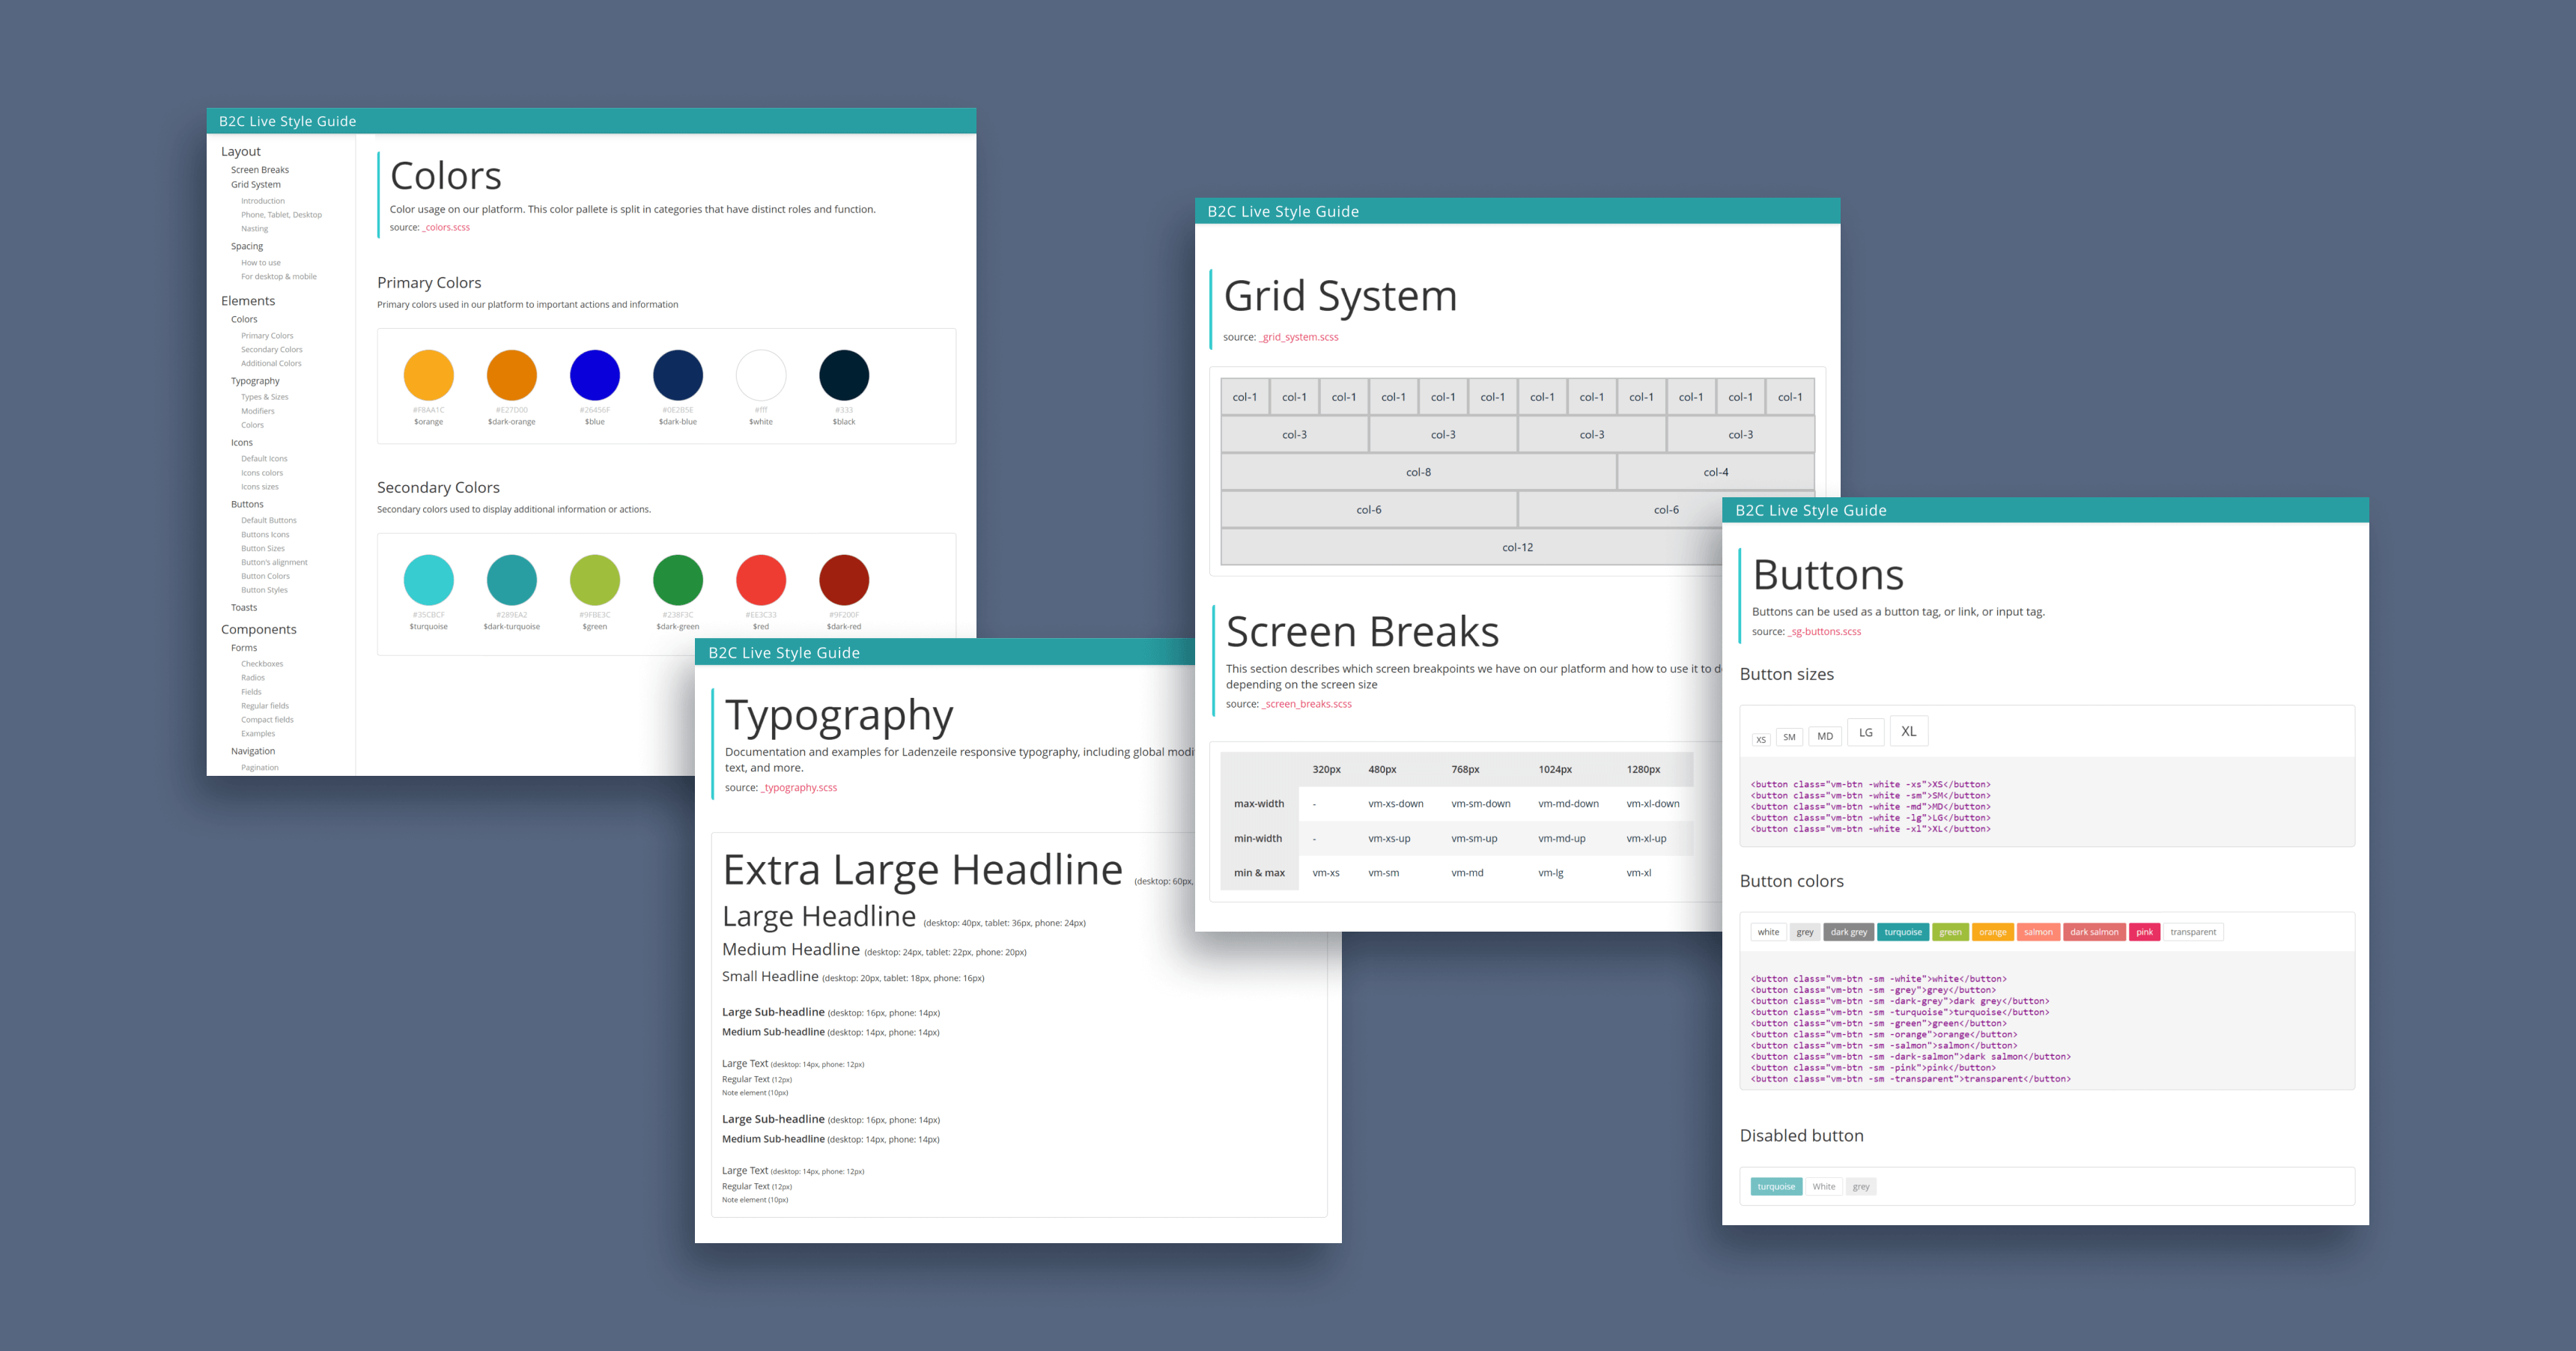 Fragments of the live style guide reference page for developers.